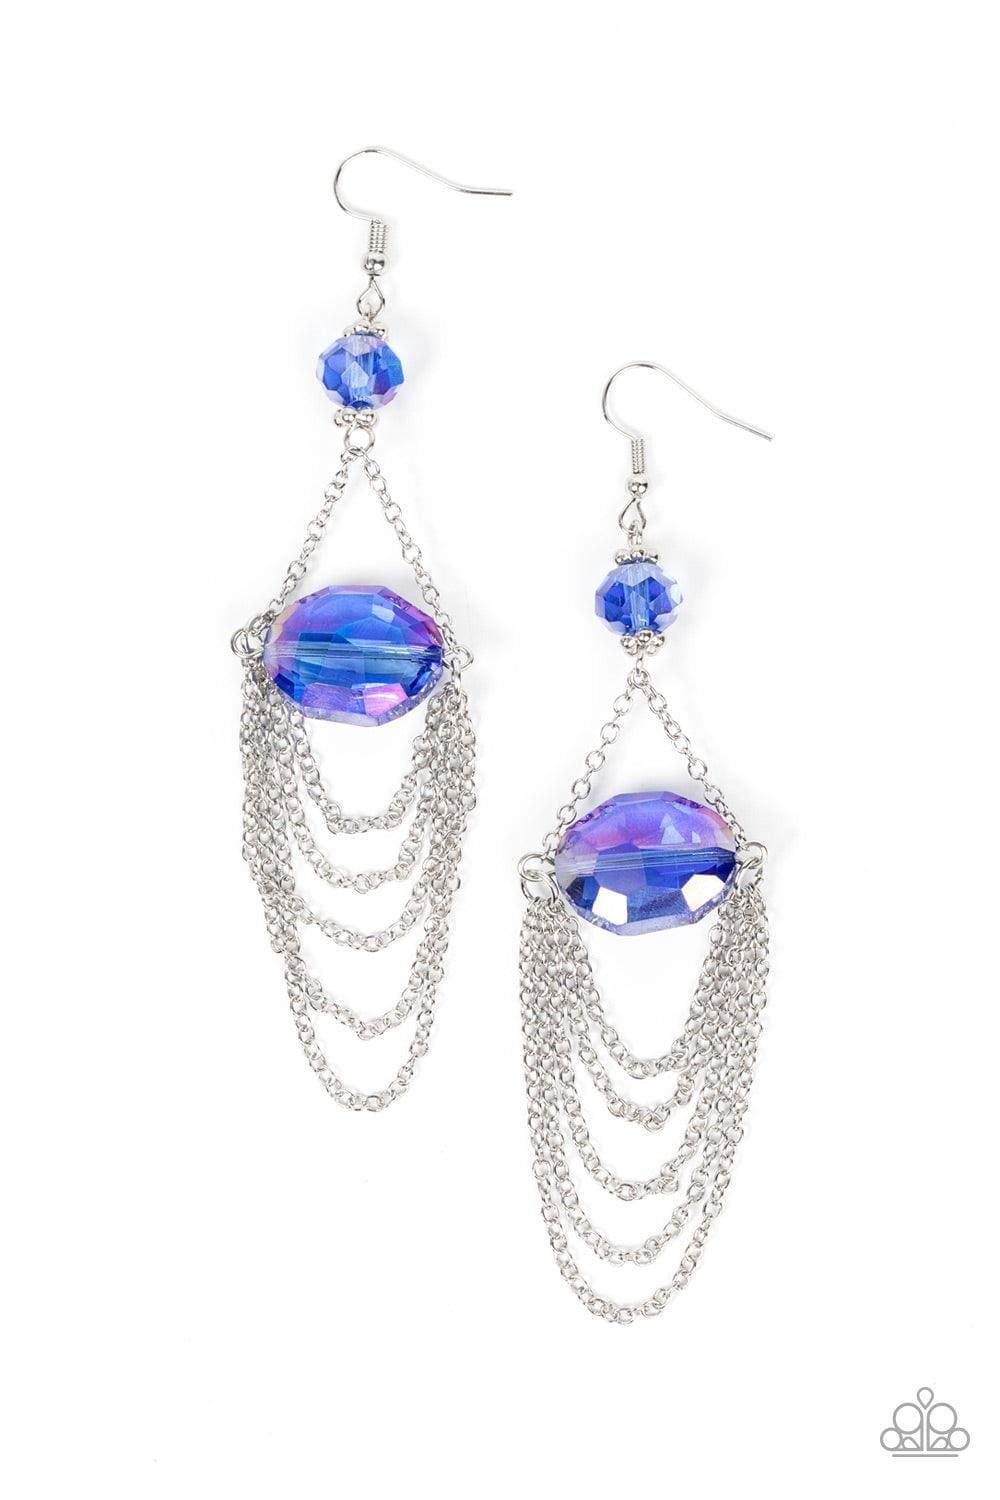 Paparazzi Accessories - Ethereally Extravagant - Blue Earrings - Bling by JessieK